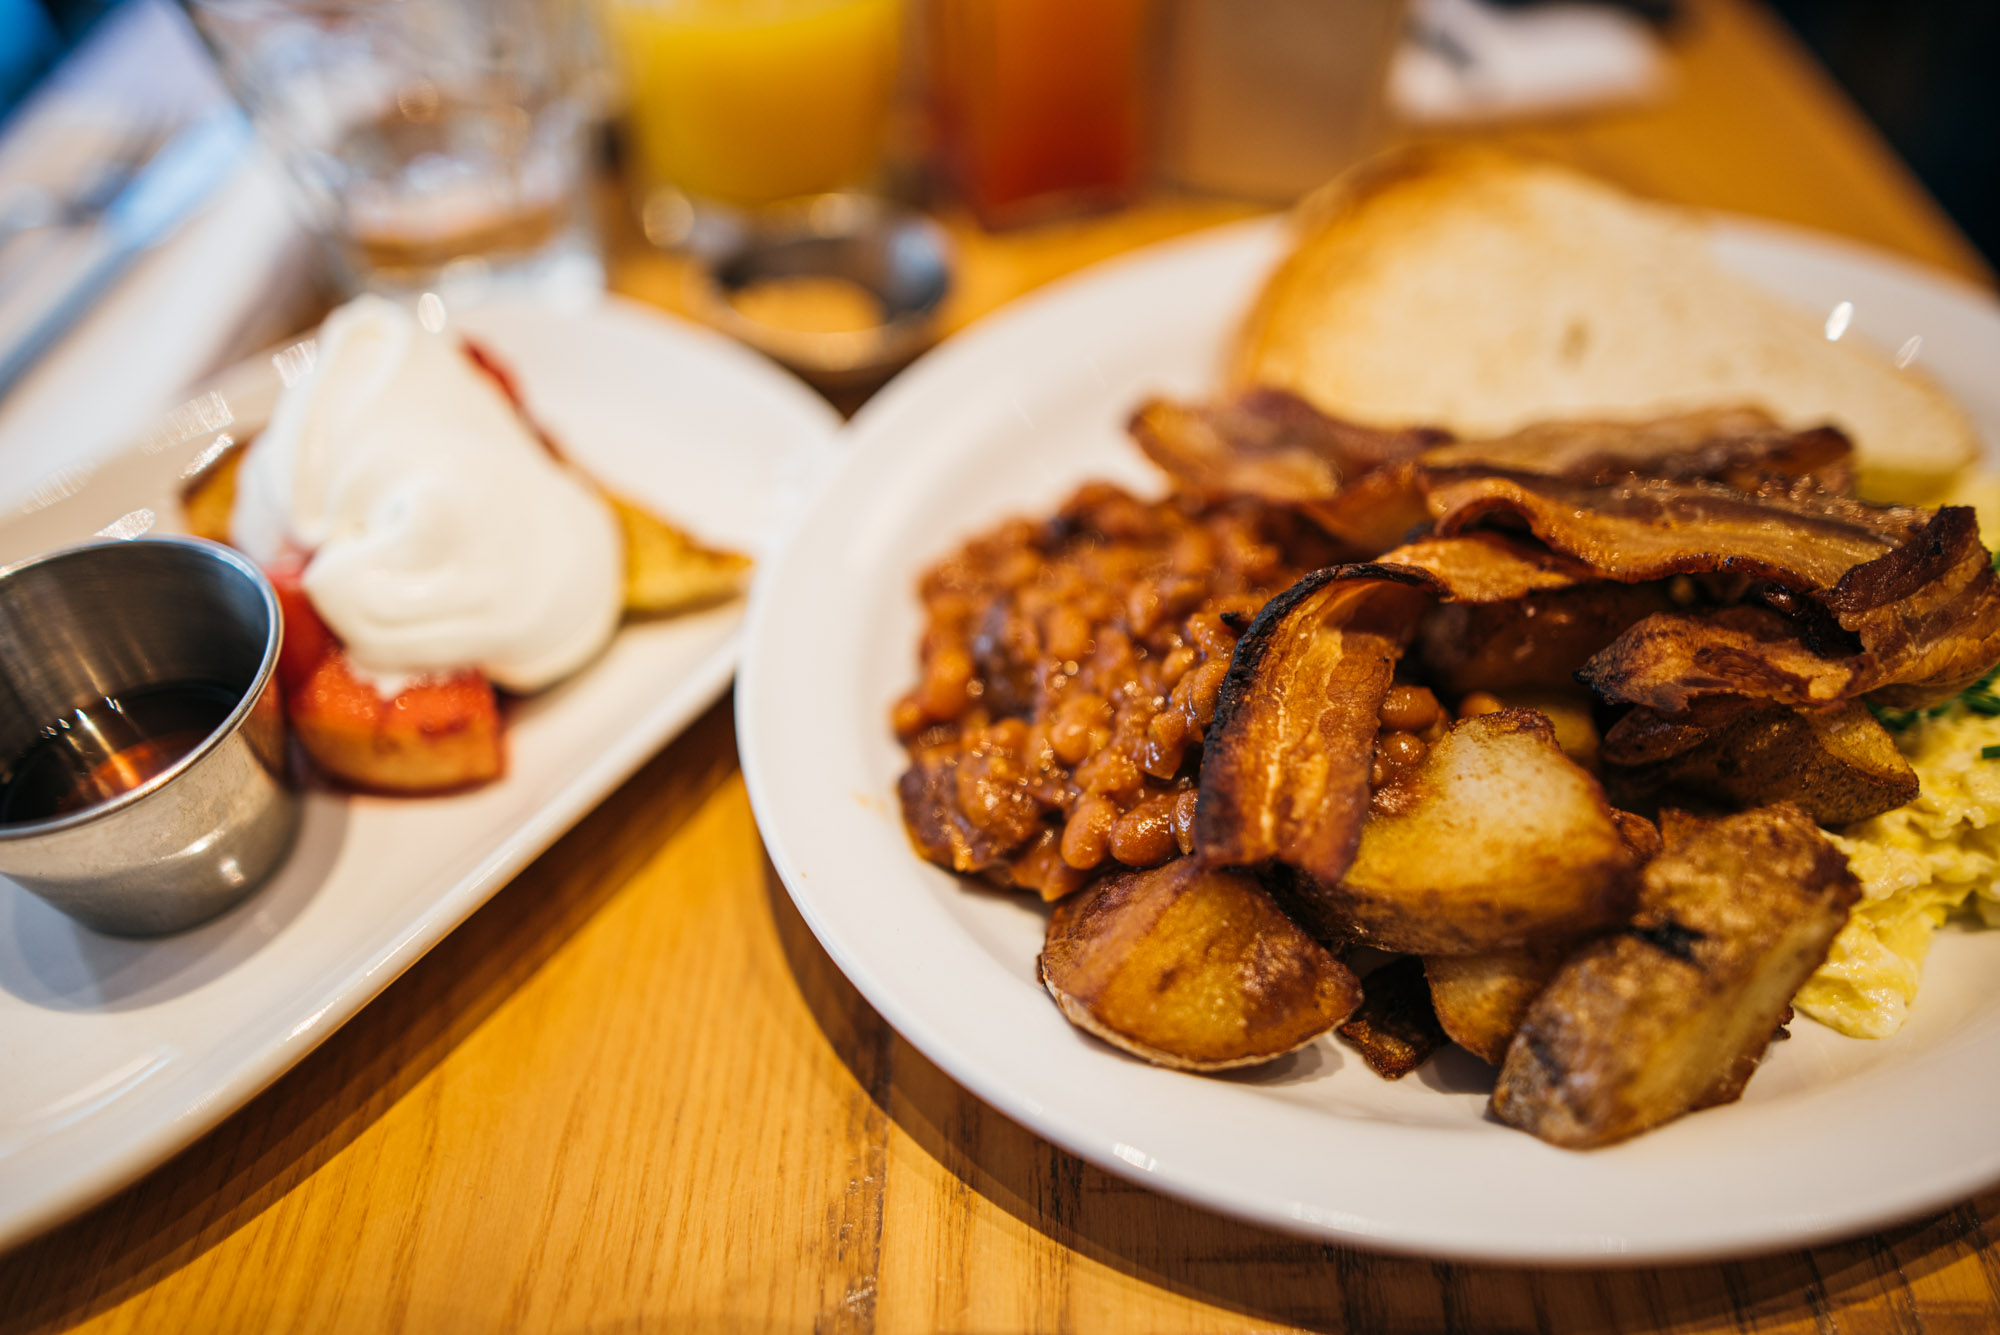 Breakfast at Wilf & Ada's - Ottawa Ultimate Guide For Foodies And Photographers